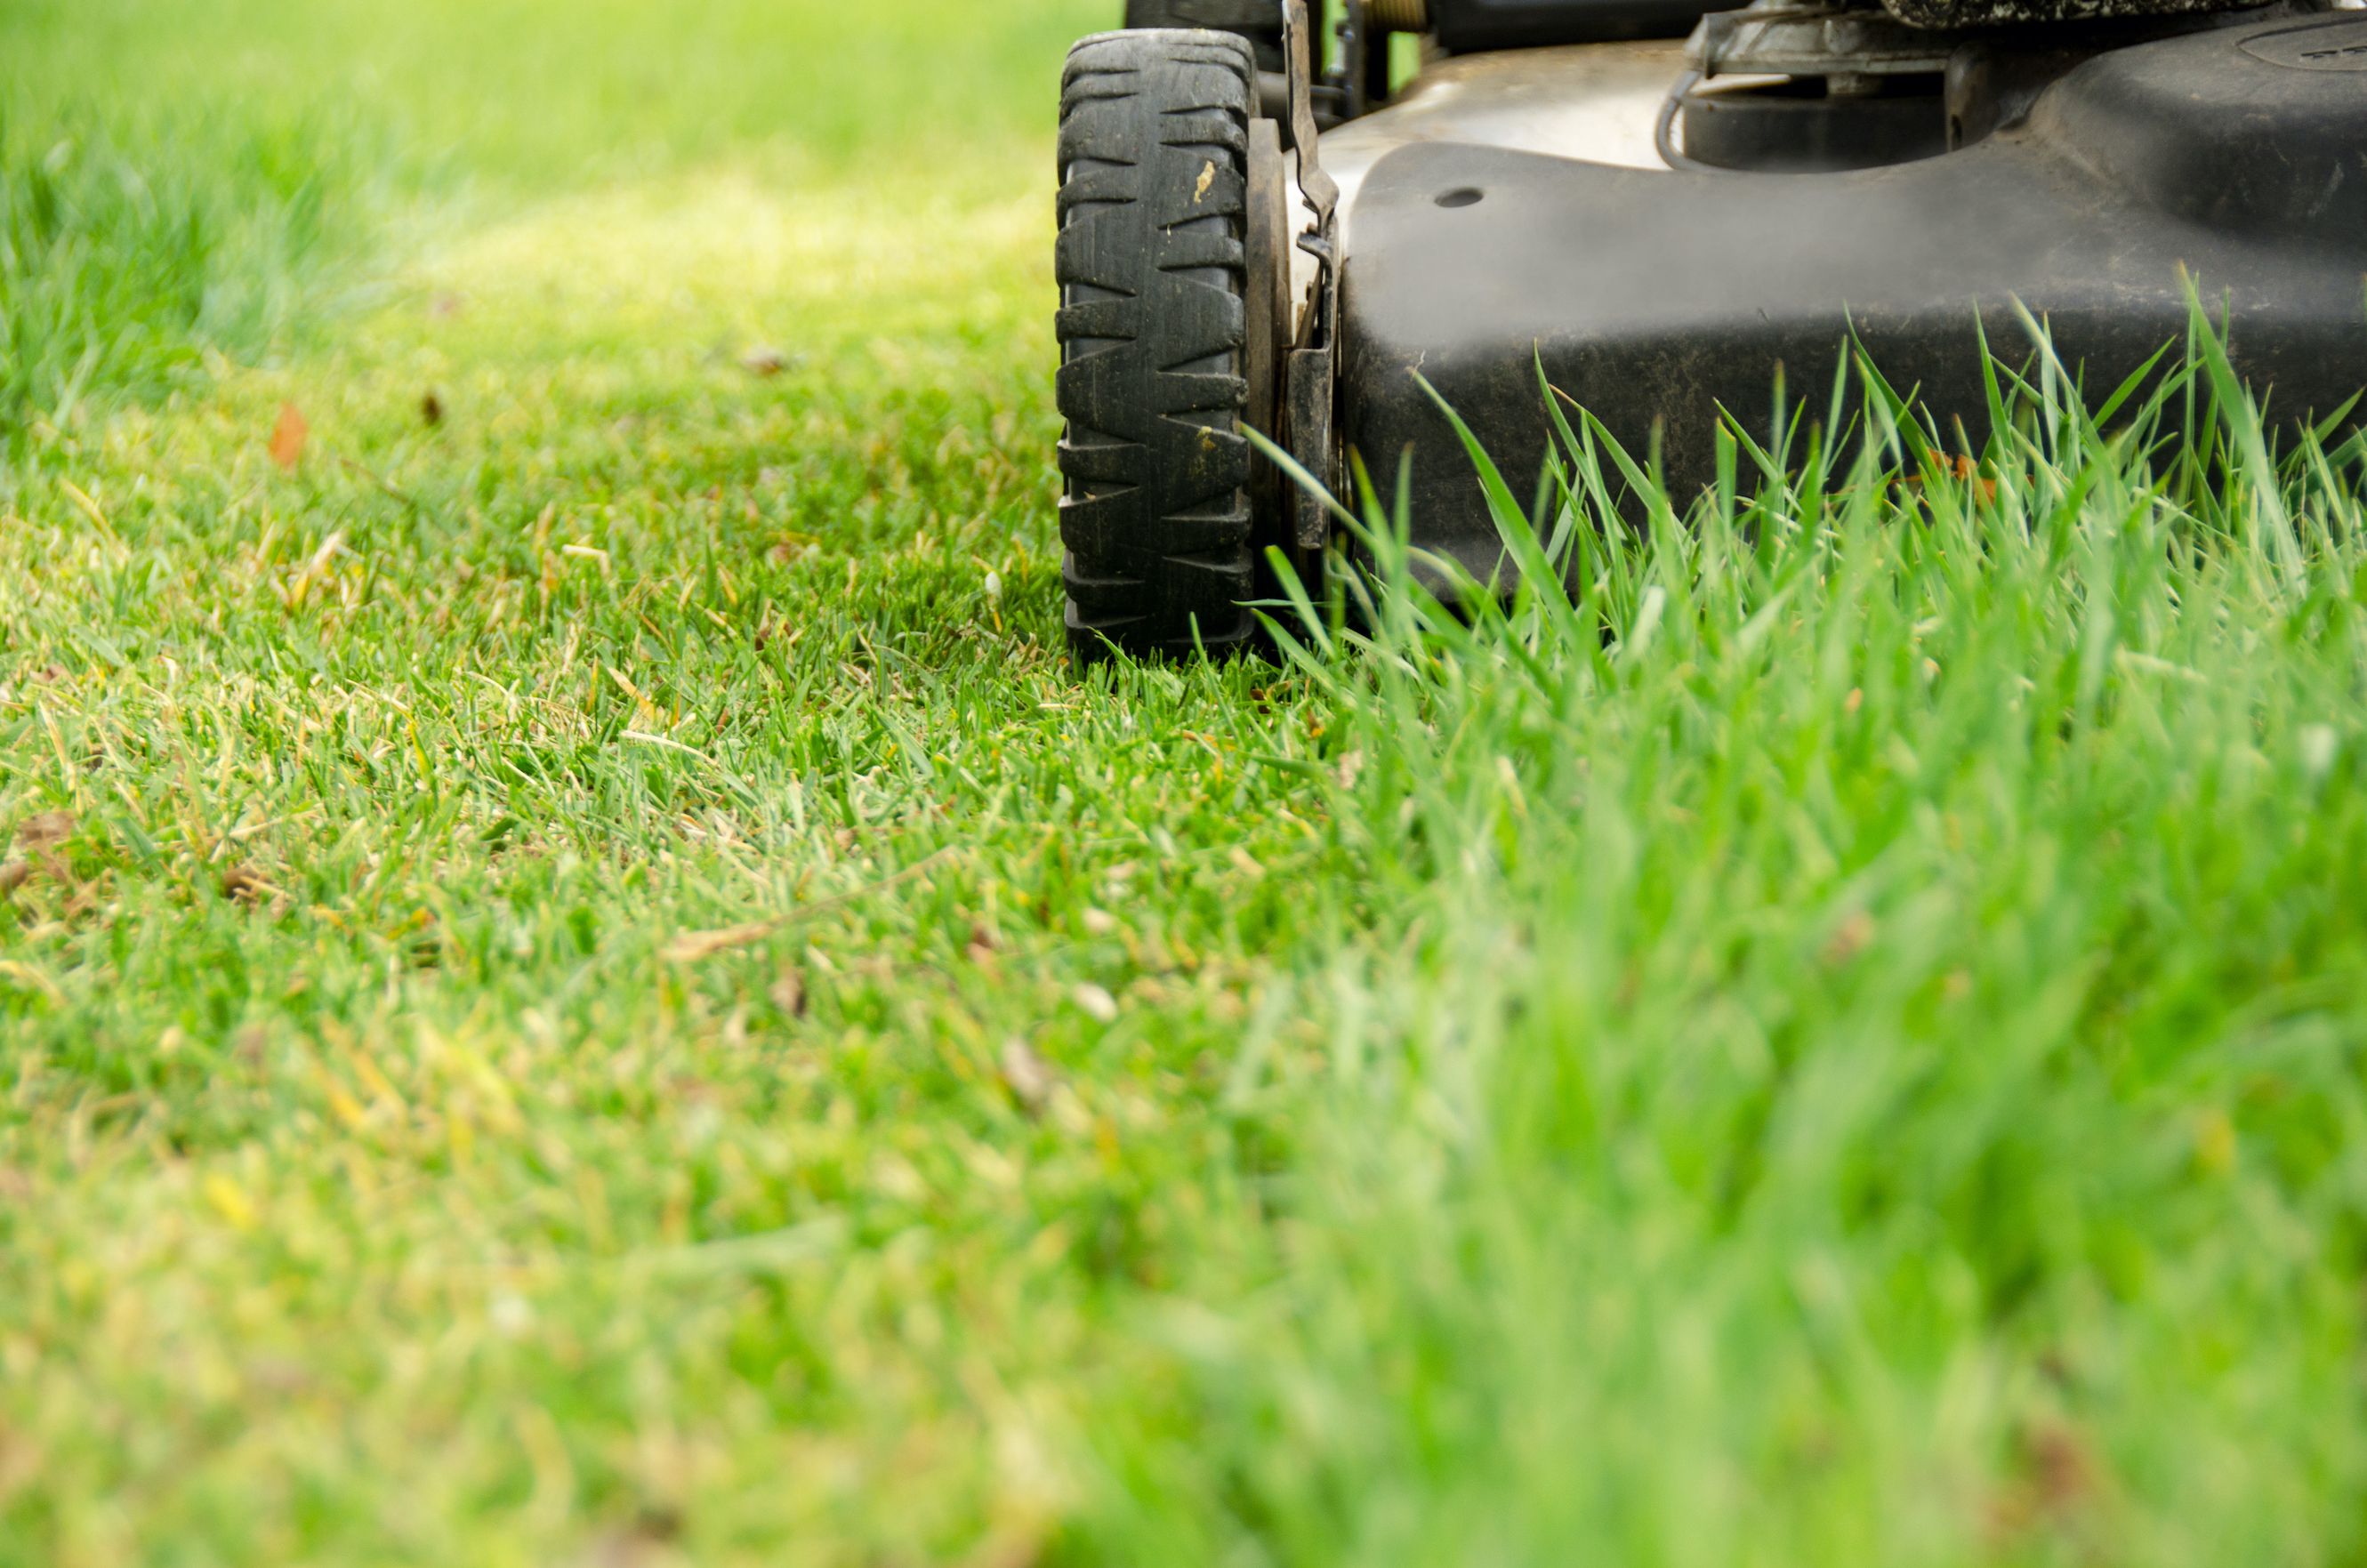  Lawn mowing height in summer 